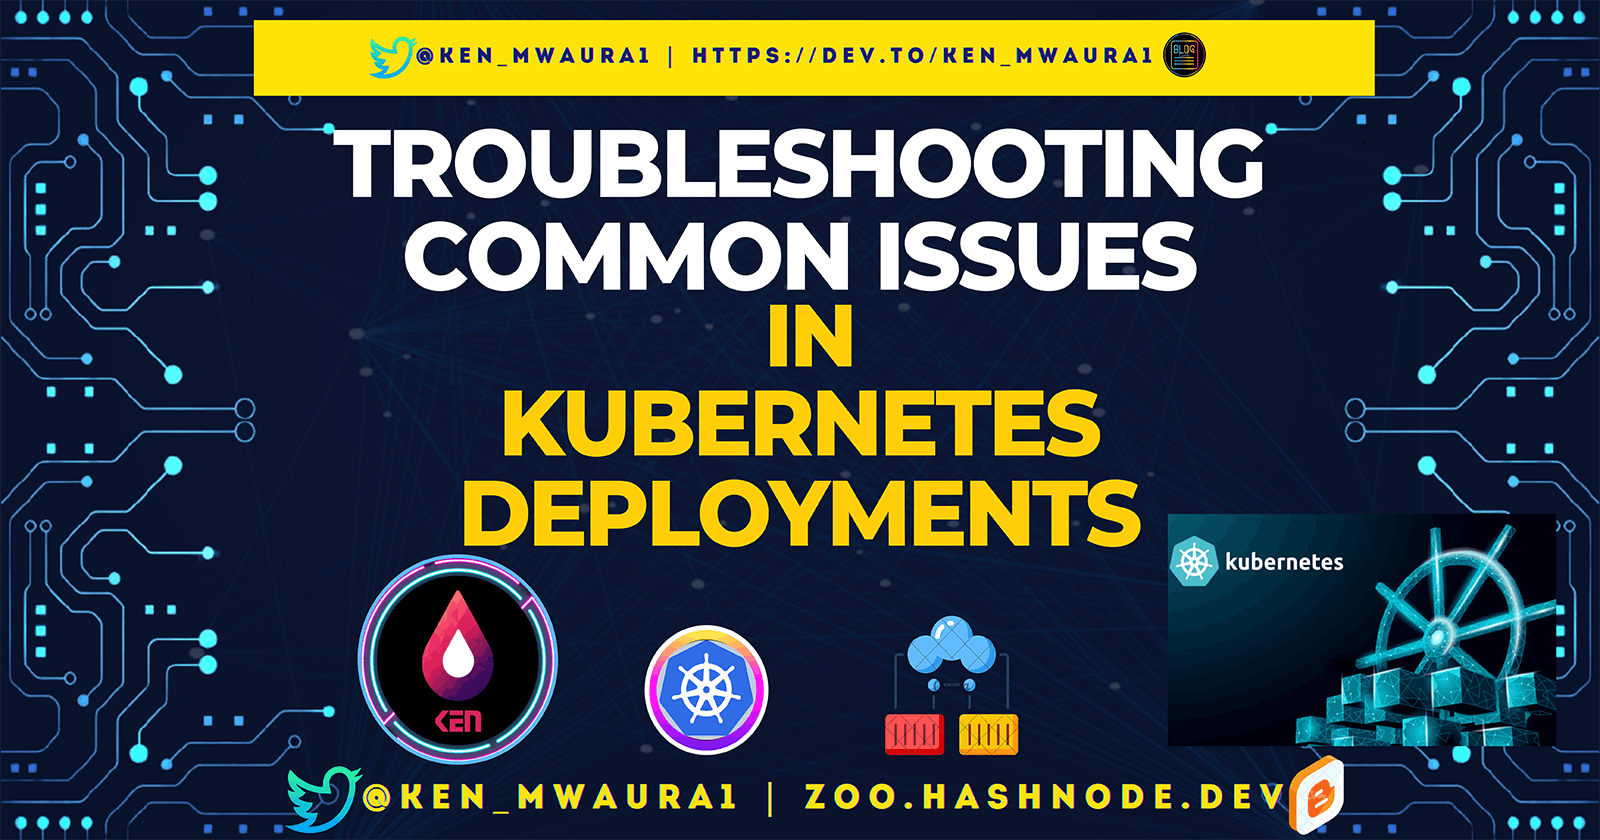 Troubleshooting Common Issues in Kubernetes Deployments